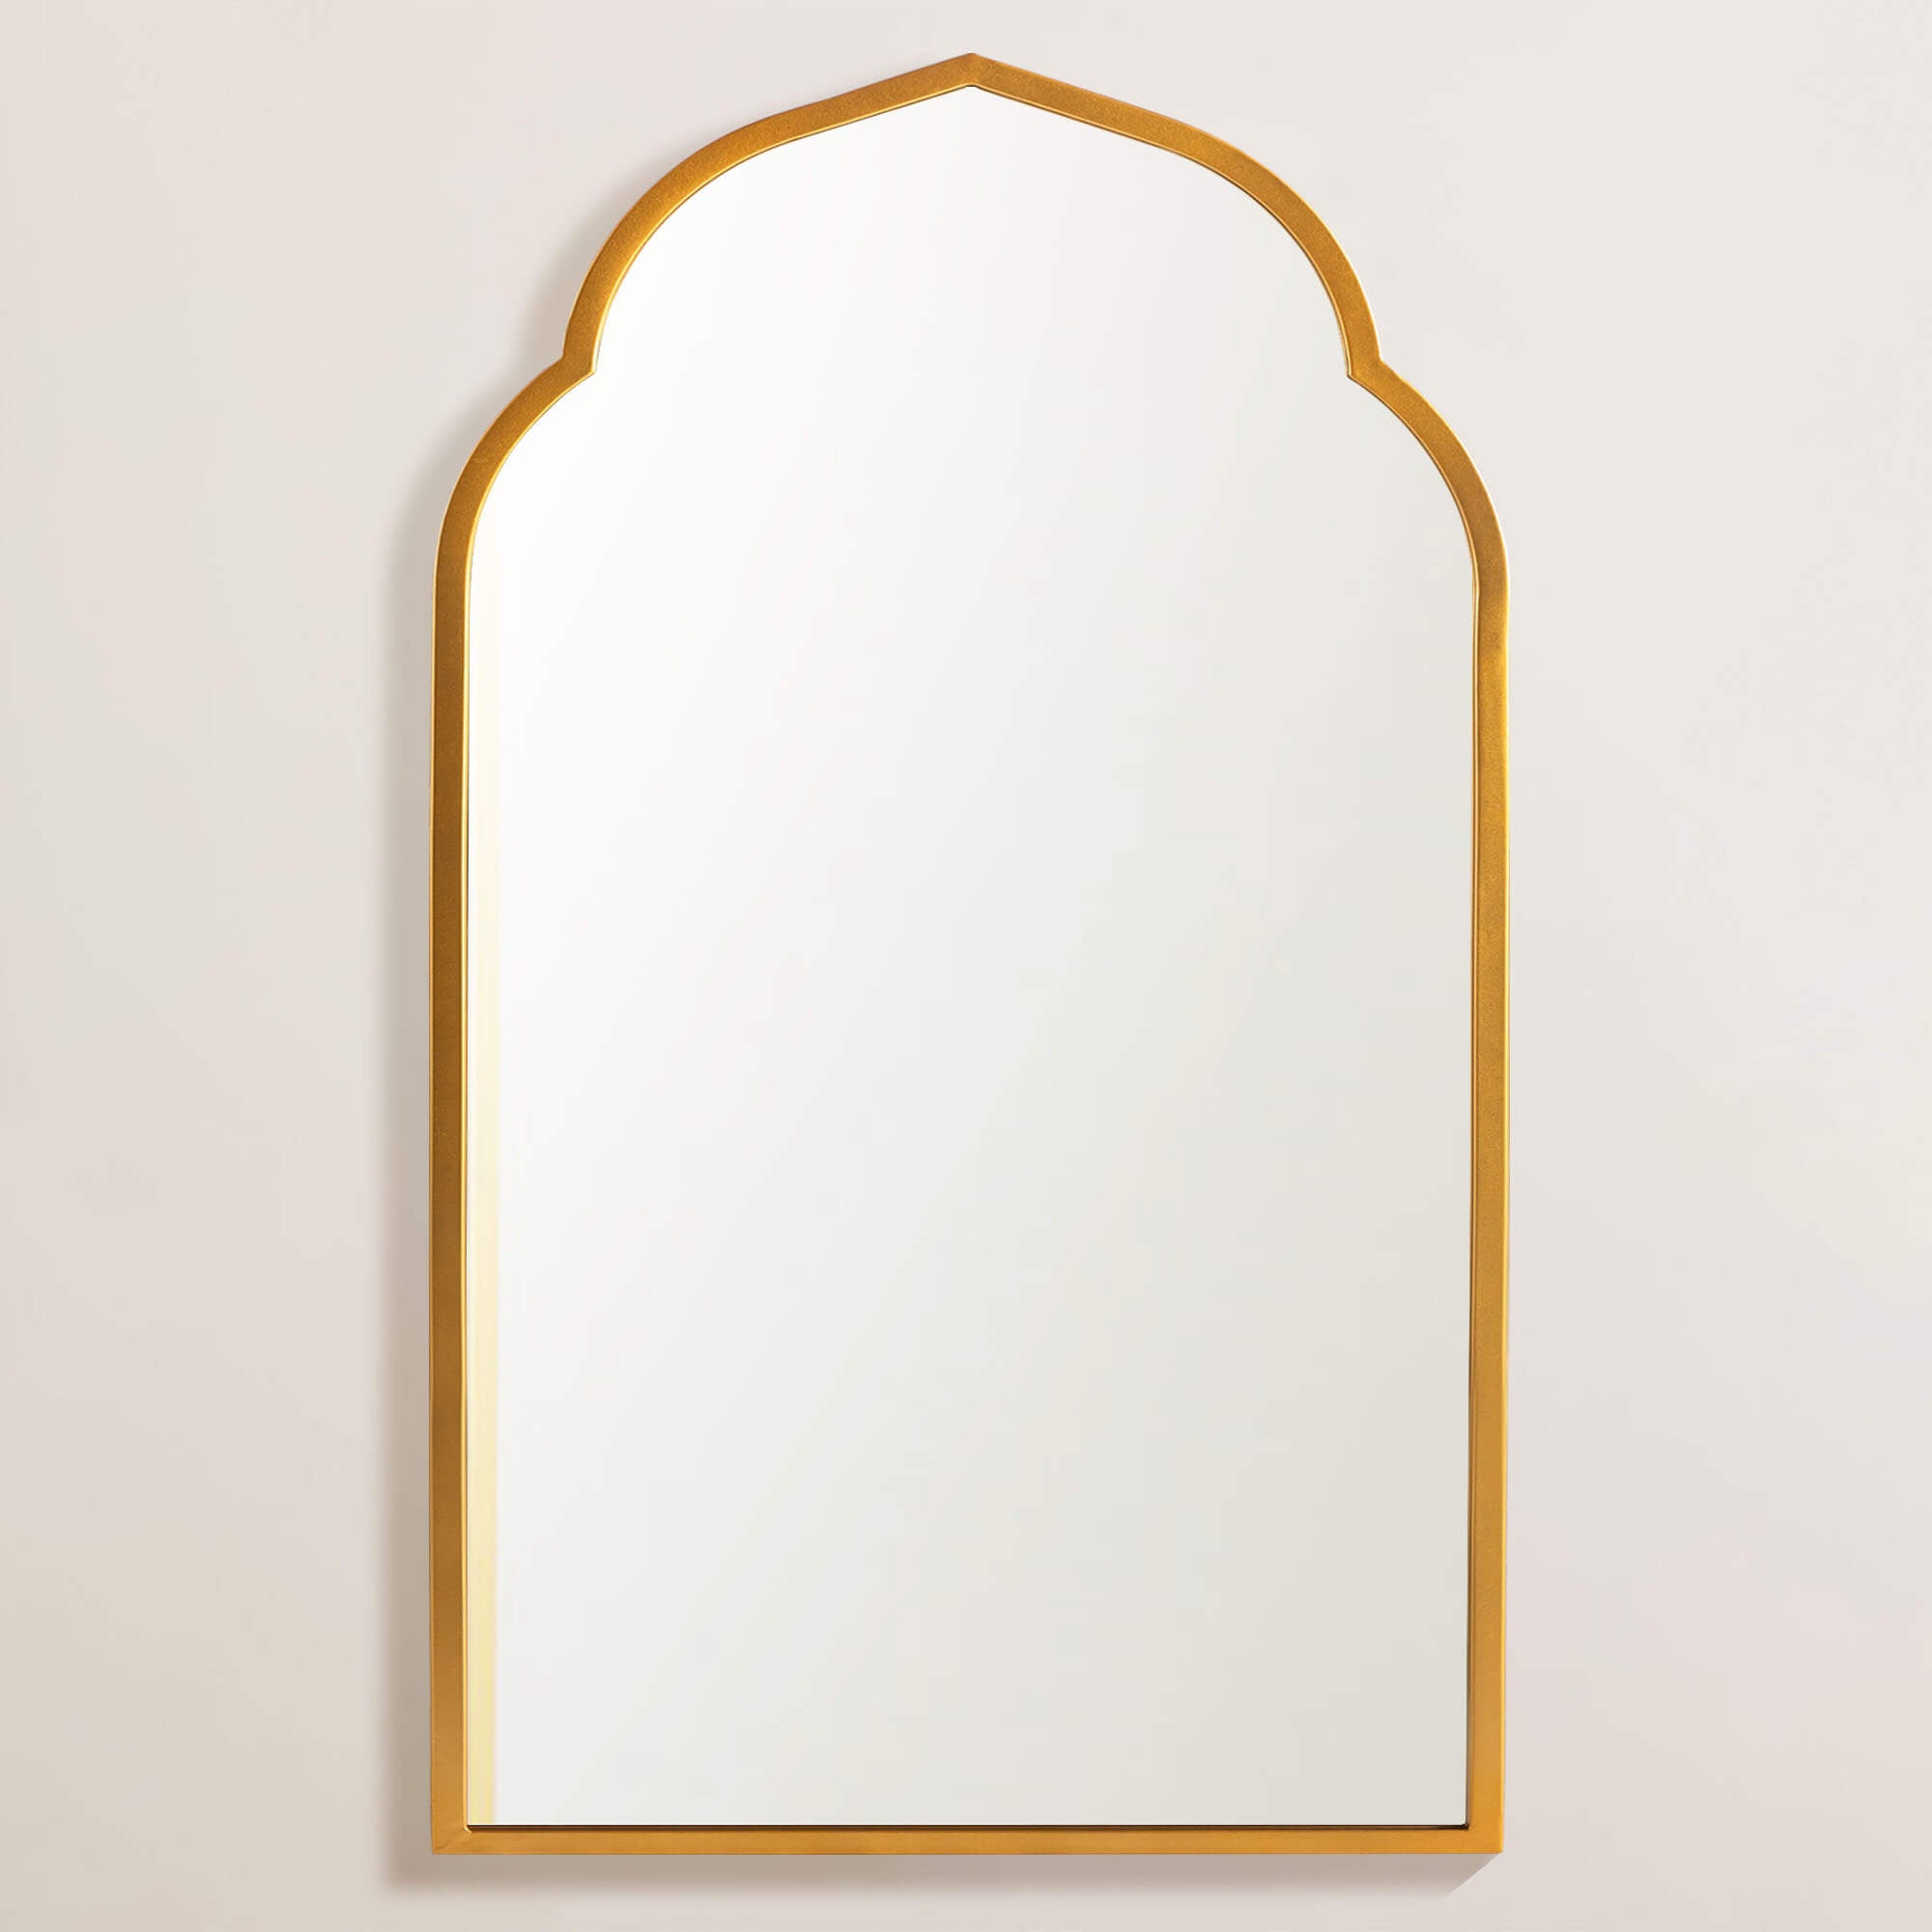 Hedda- Arch Moroccan Inspired Gold Iron Frame Wall Mirror